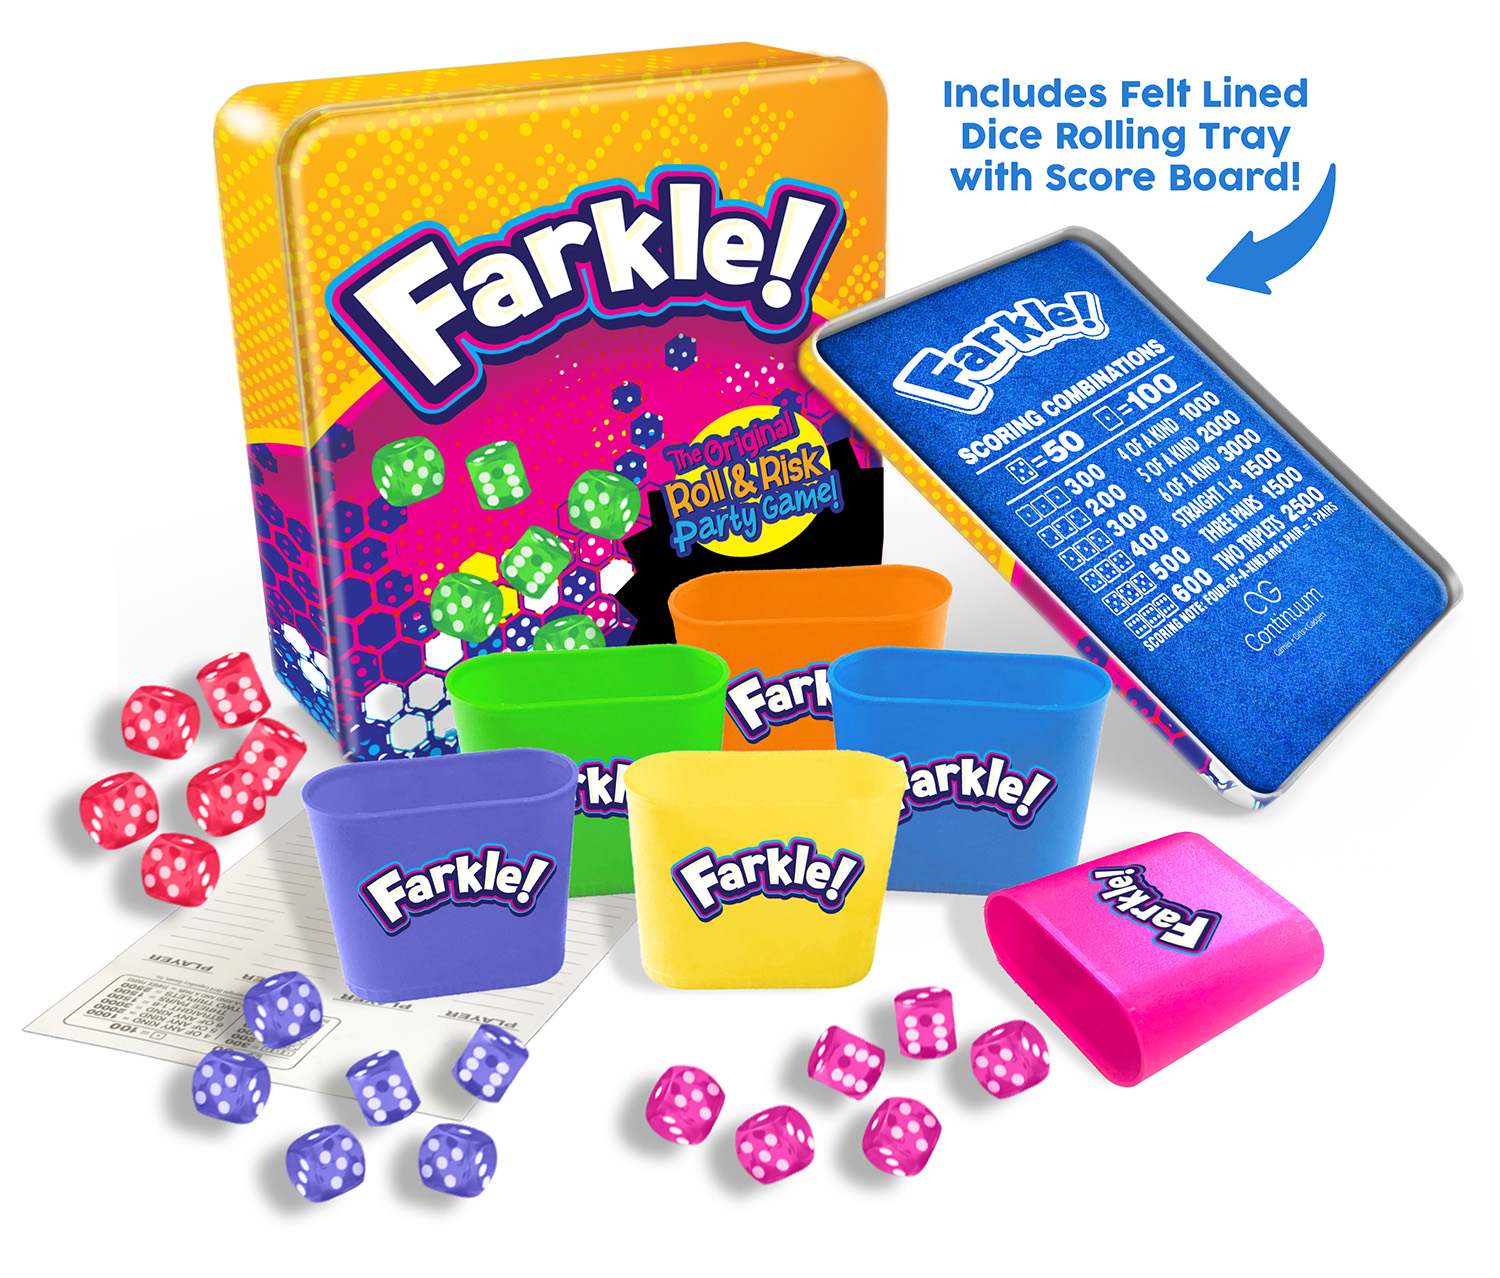 Deluxe Farkle! - Scratch and Dent